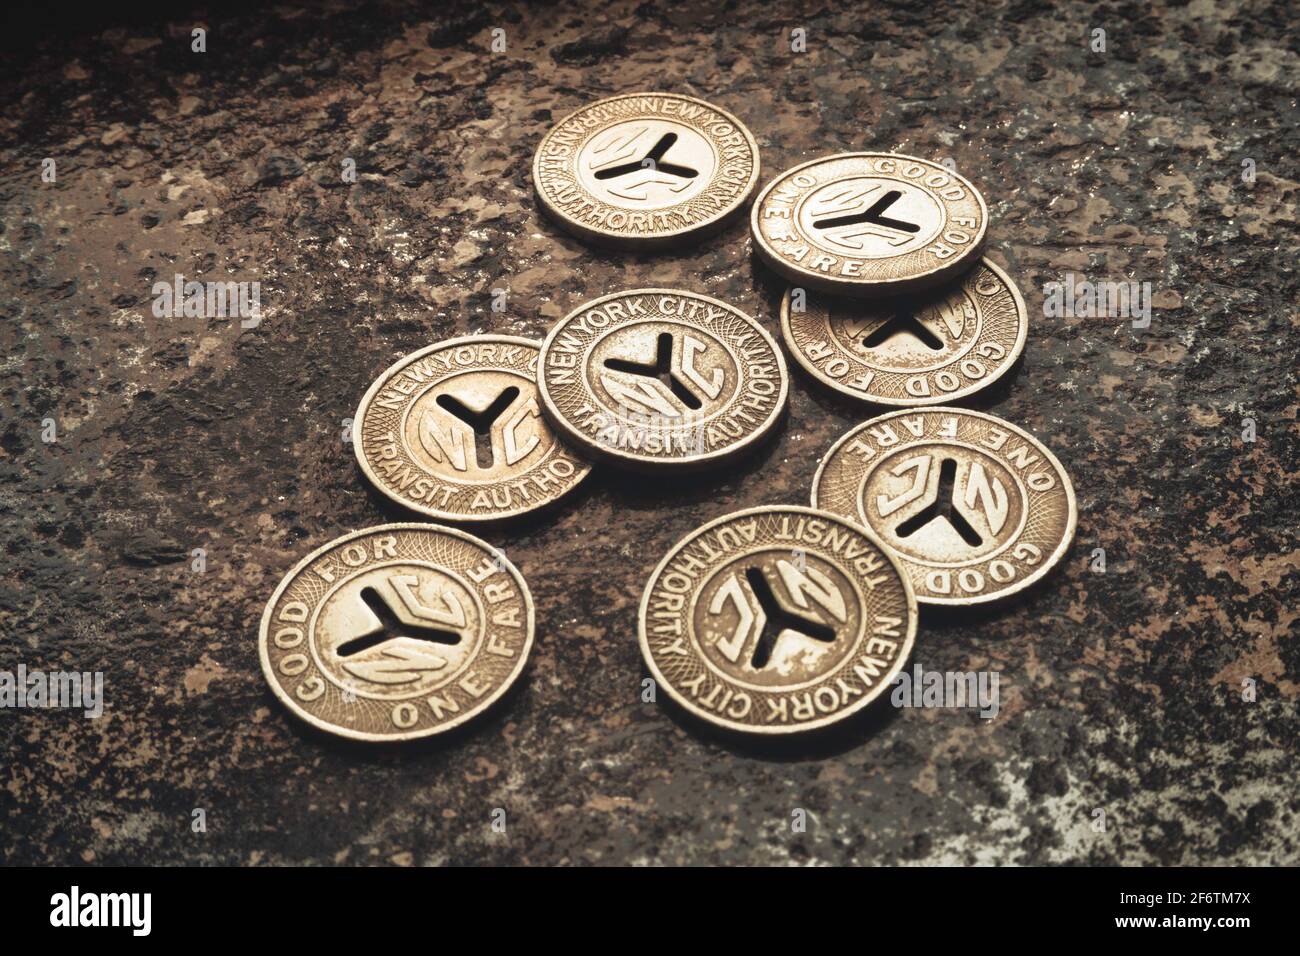 Tokens of a time gone by MBTA's brass tokens pull out of station